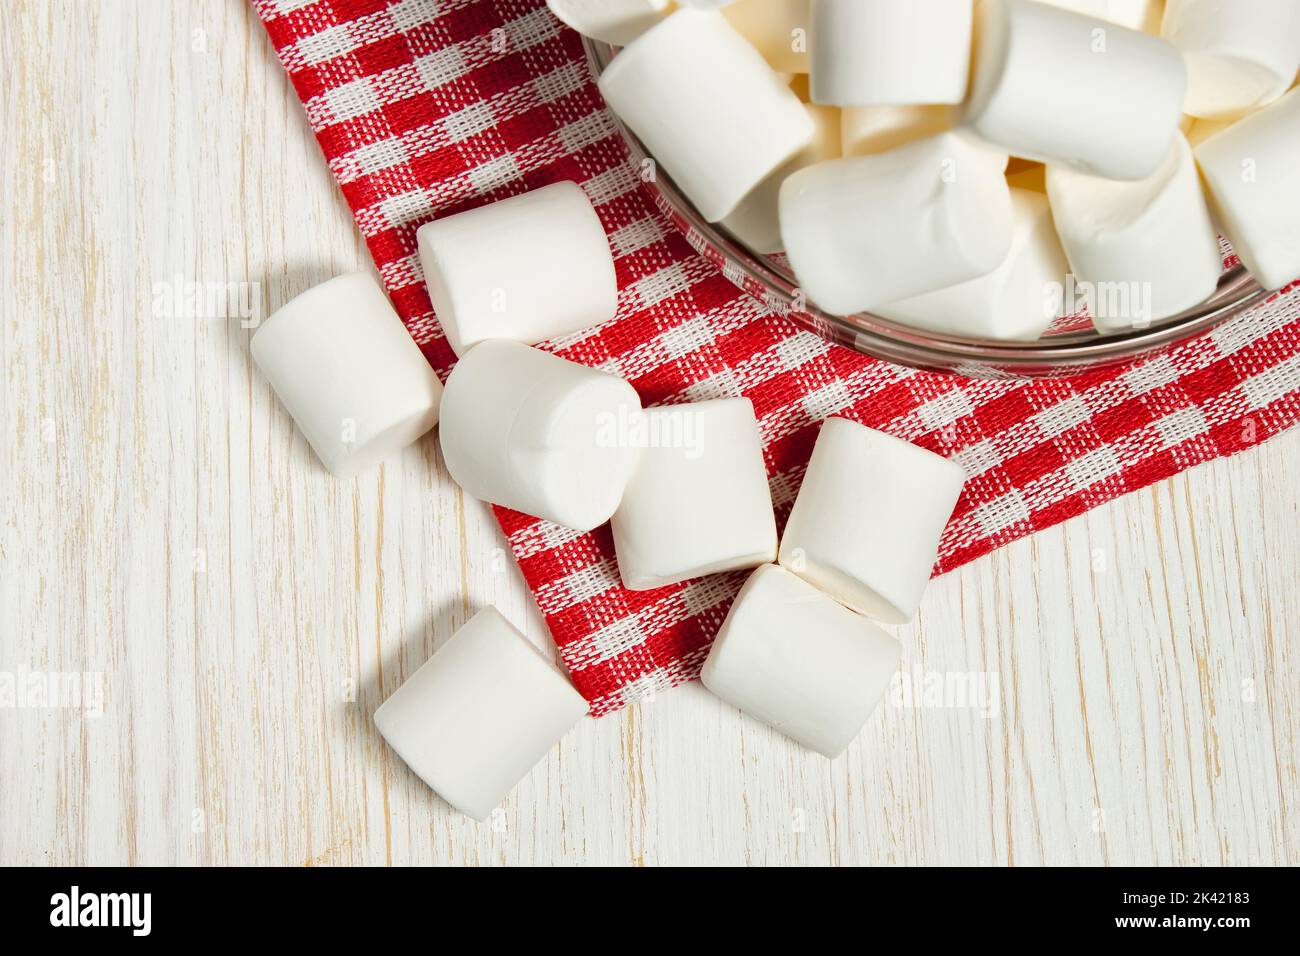 Heart shaped plate with heart shaped marshmallows, flat lay. Stock Photo by  puhimec